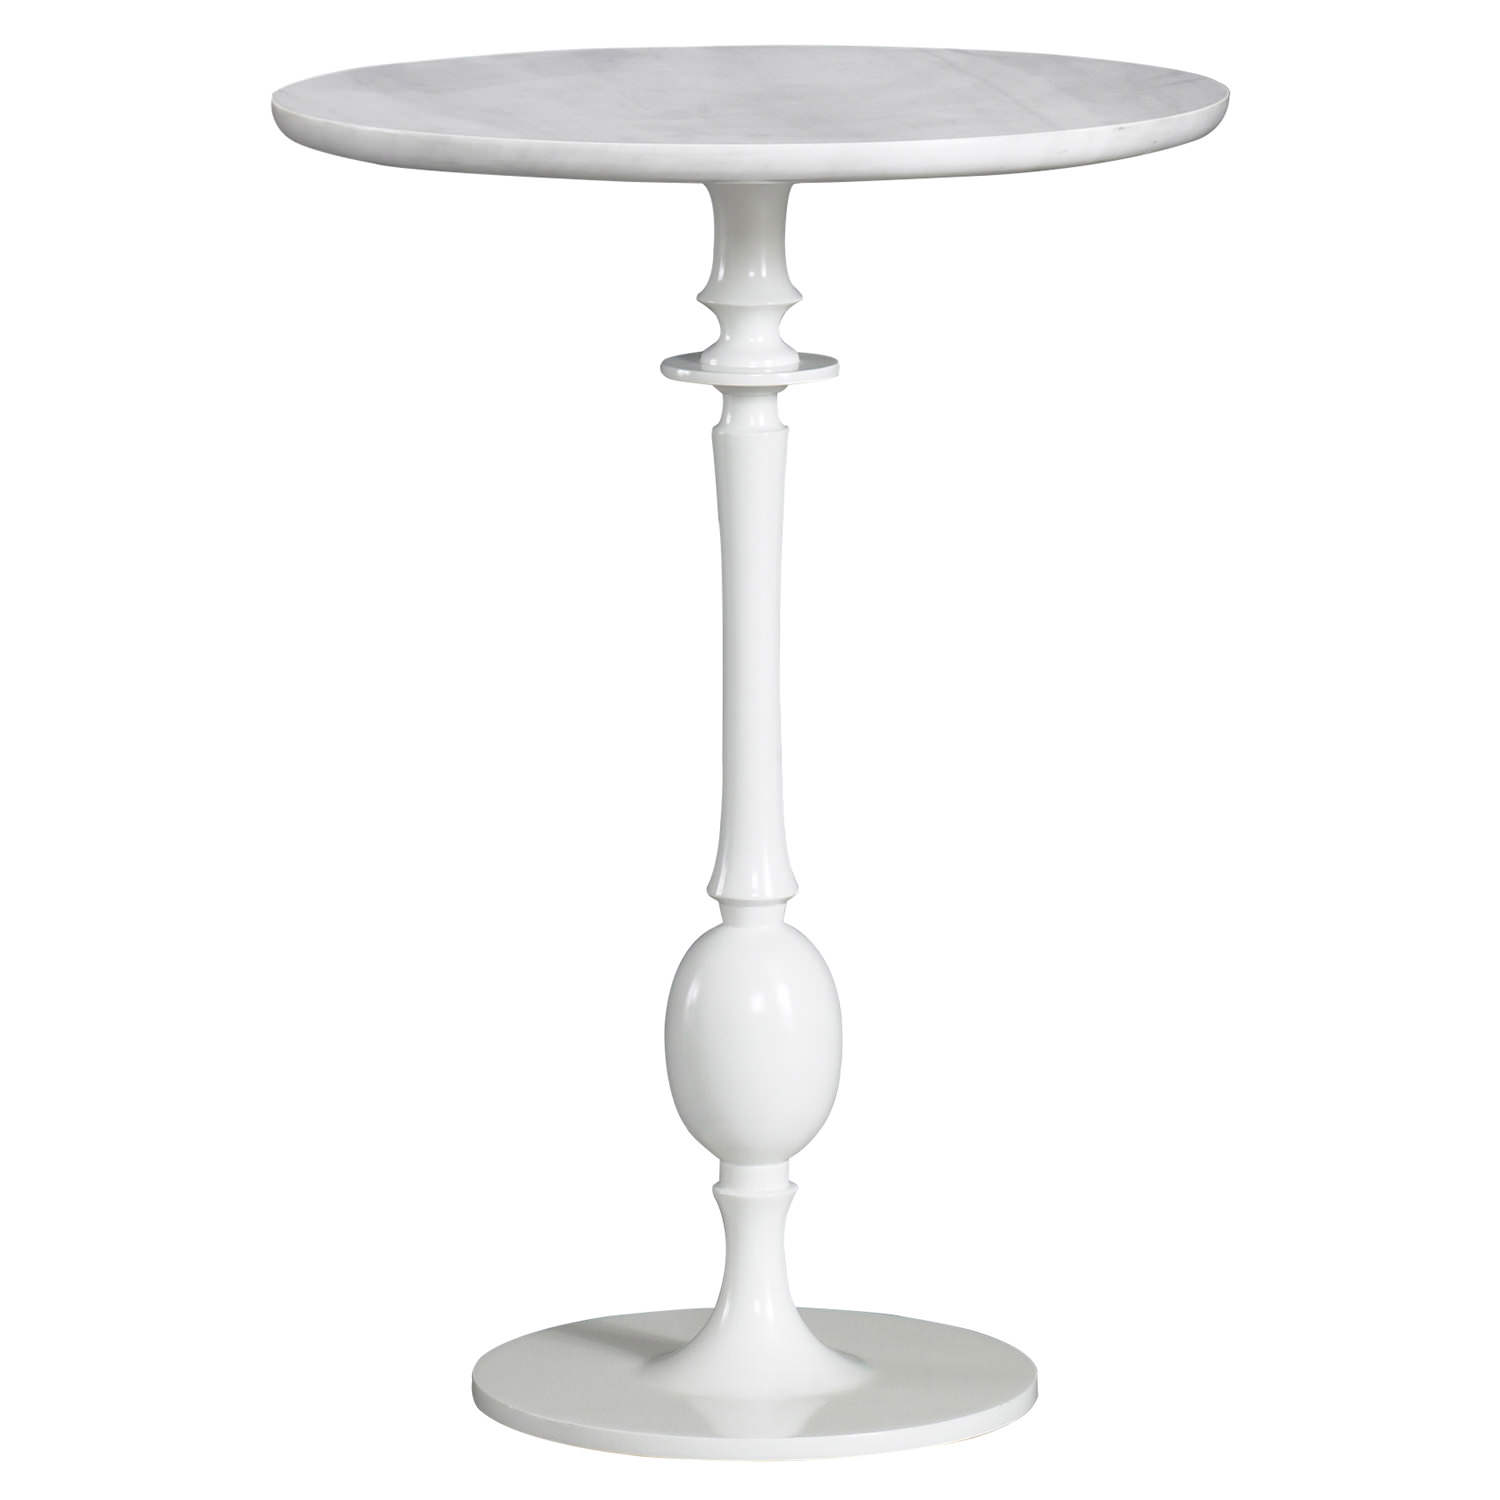 build pedestal accent table khandzoo home decor white black inspiration gallery from teak outdoor end living room mid century sideboard thin entrance coastal bedroom ideas pottery